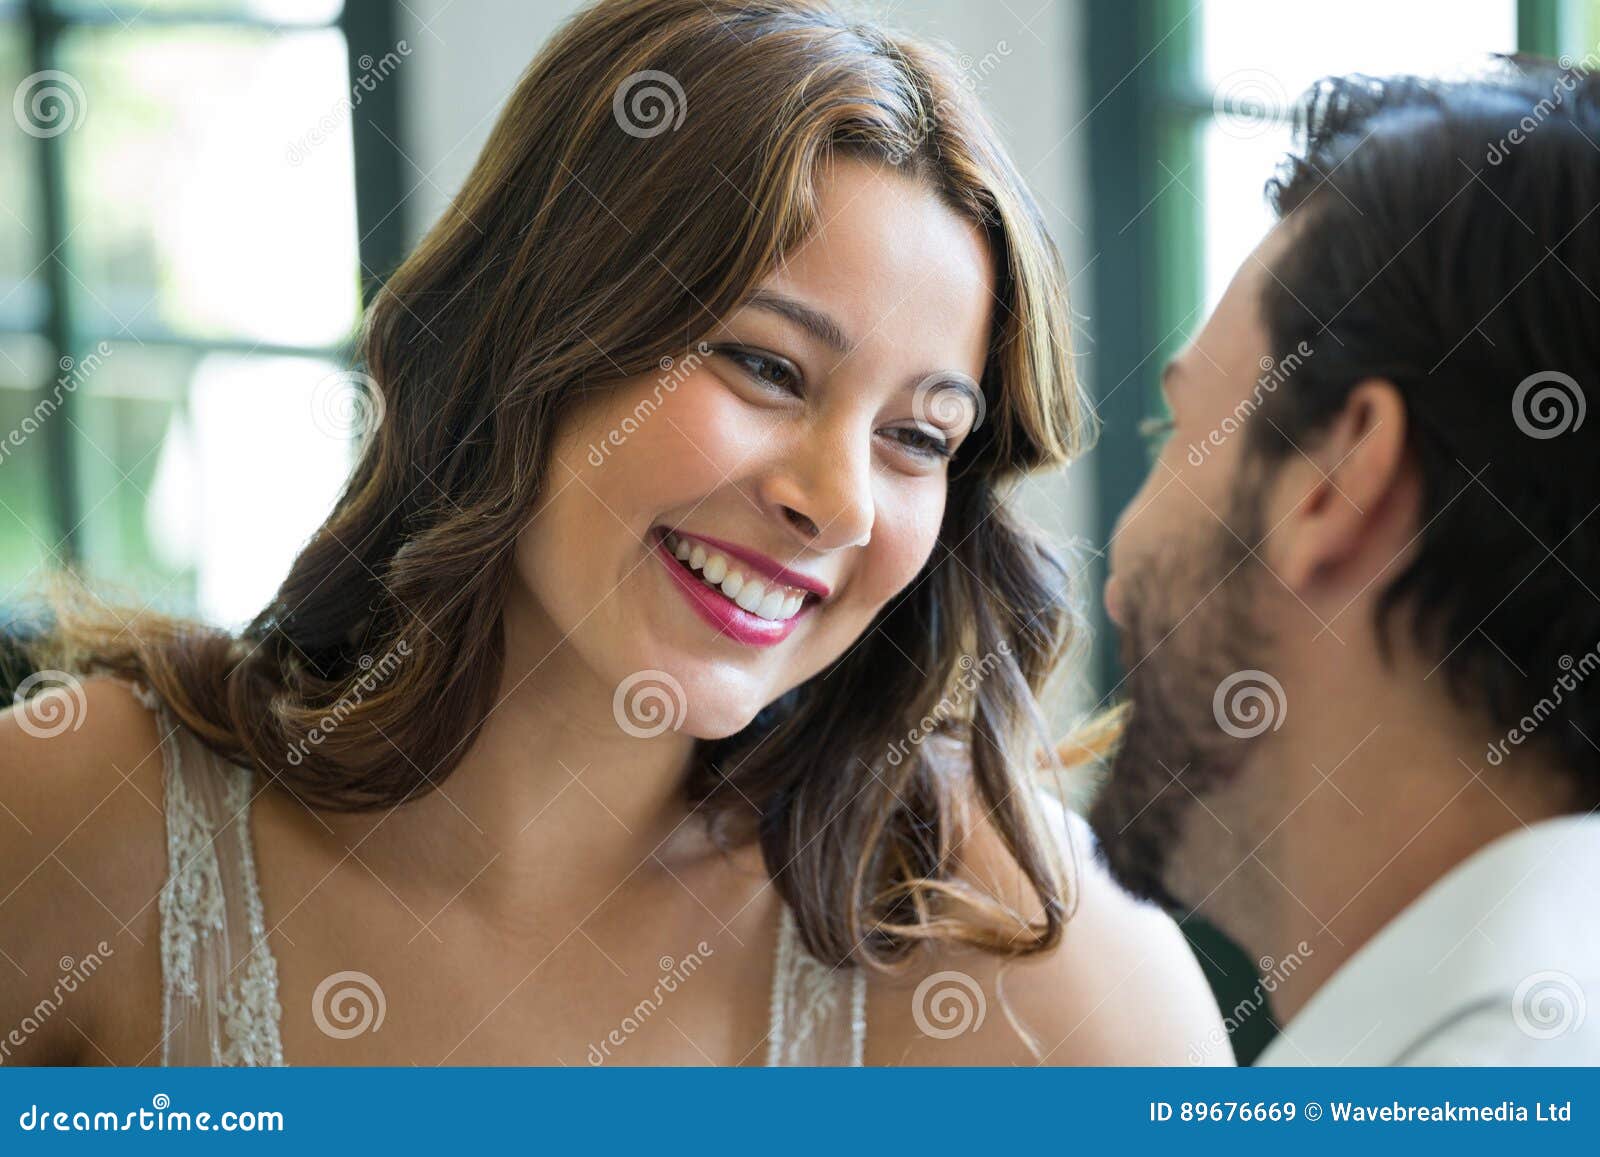 Smiling Woman Looking at Man in Restaurant Stock Image  Image of